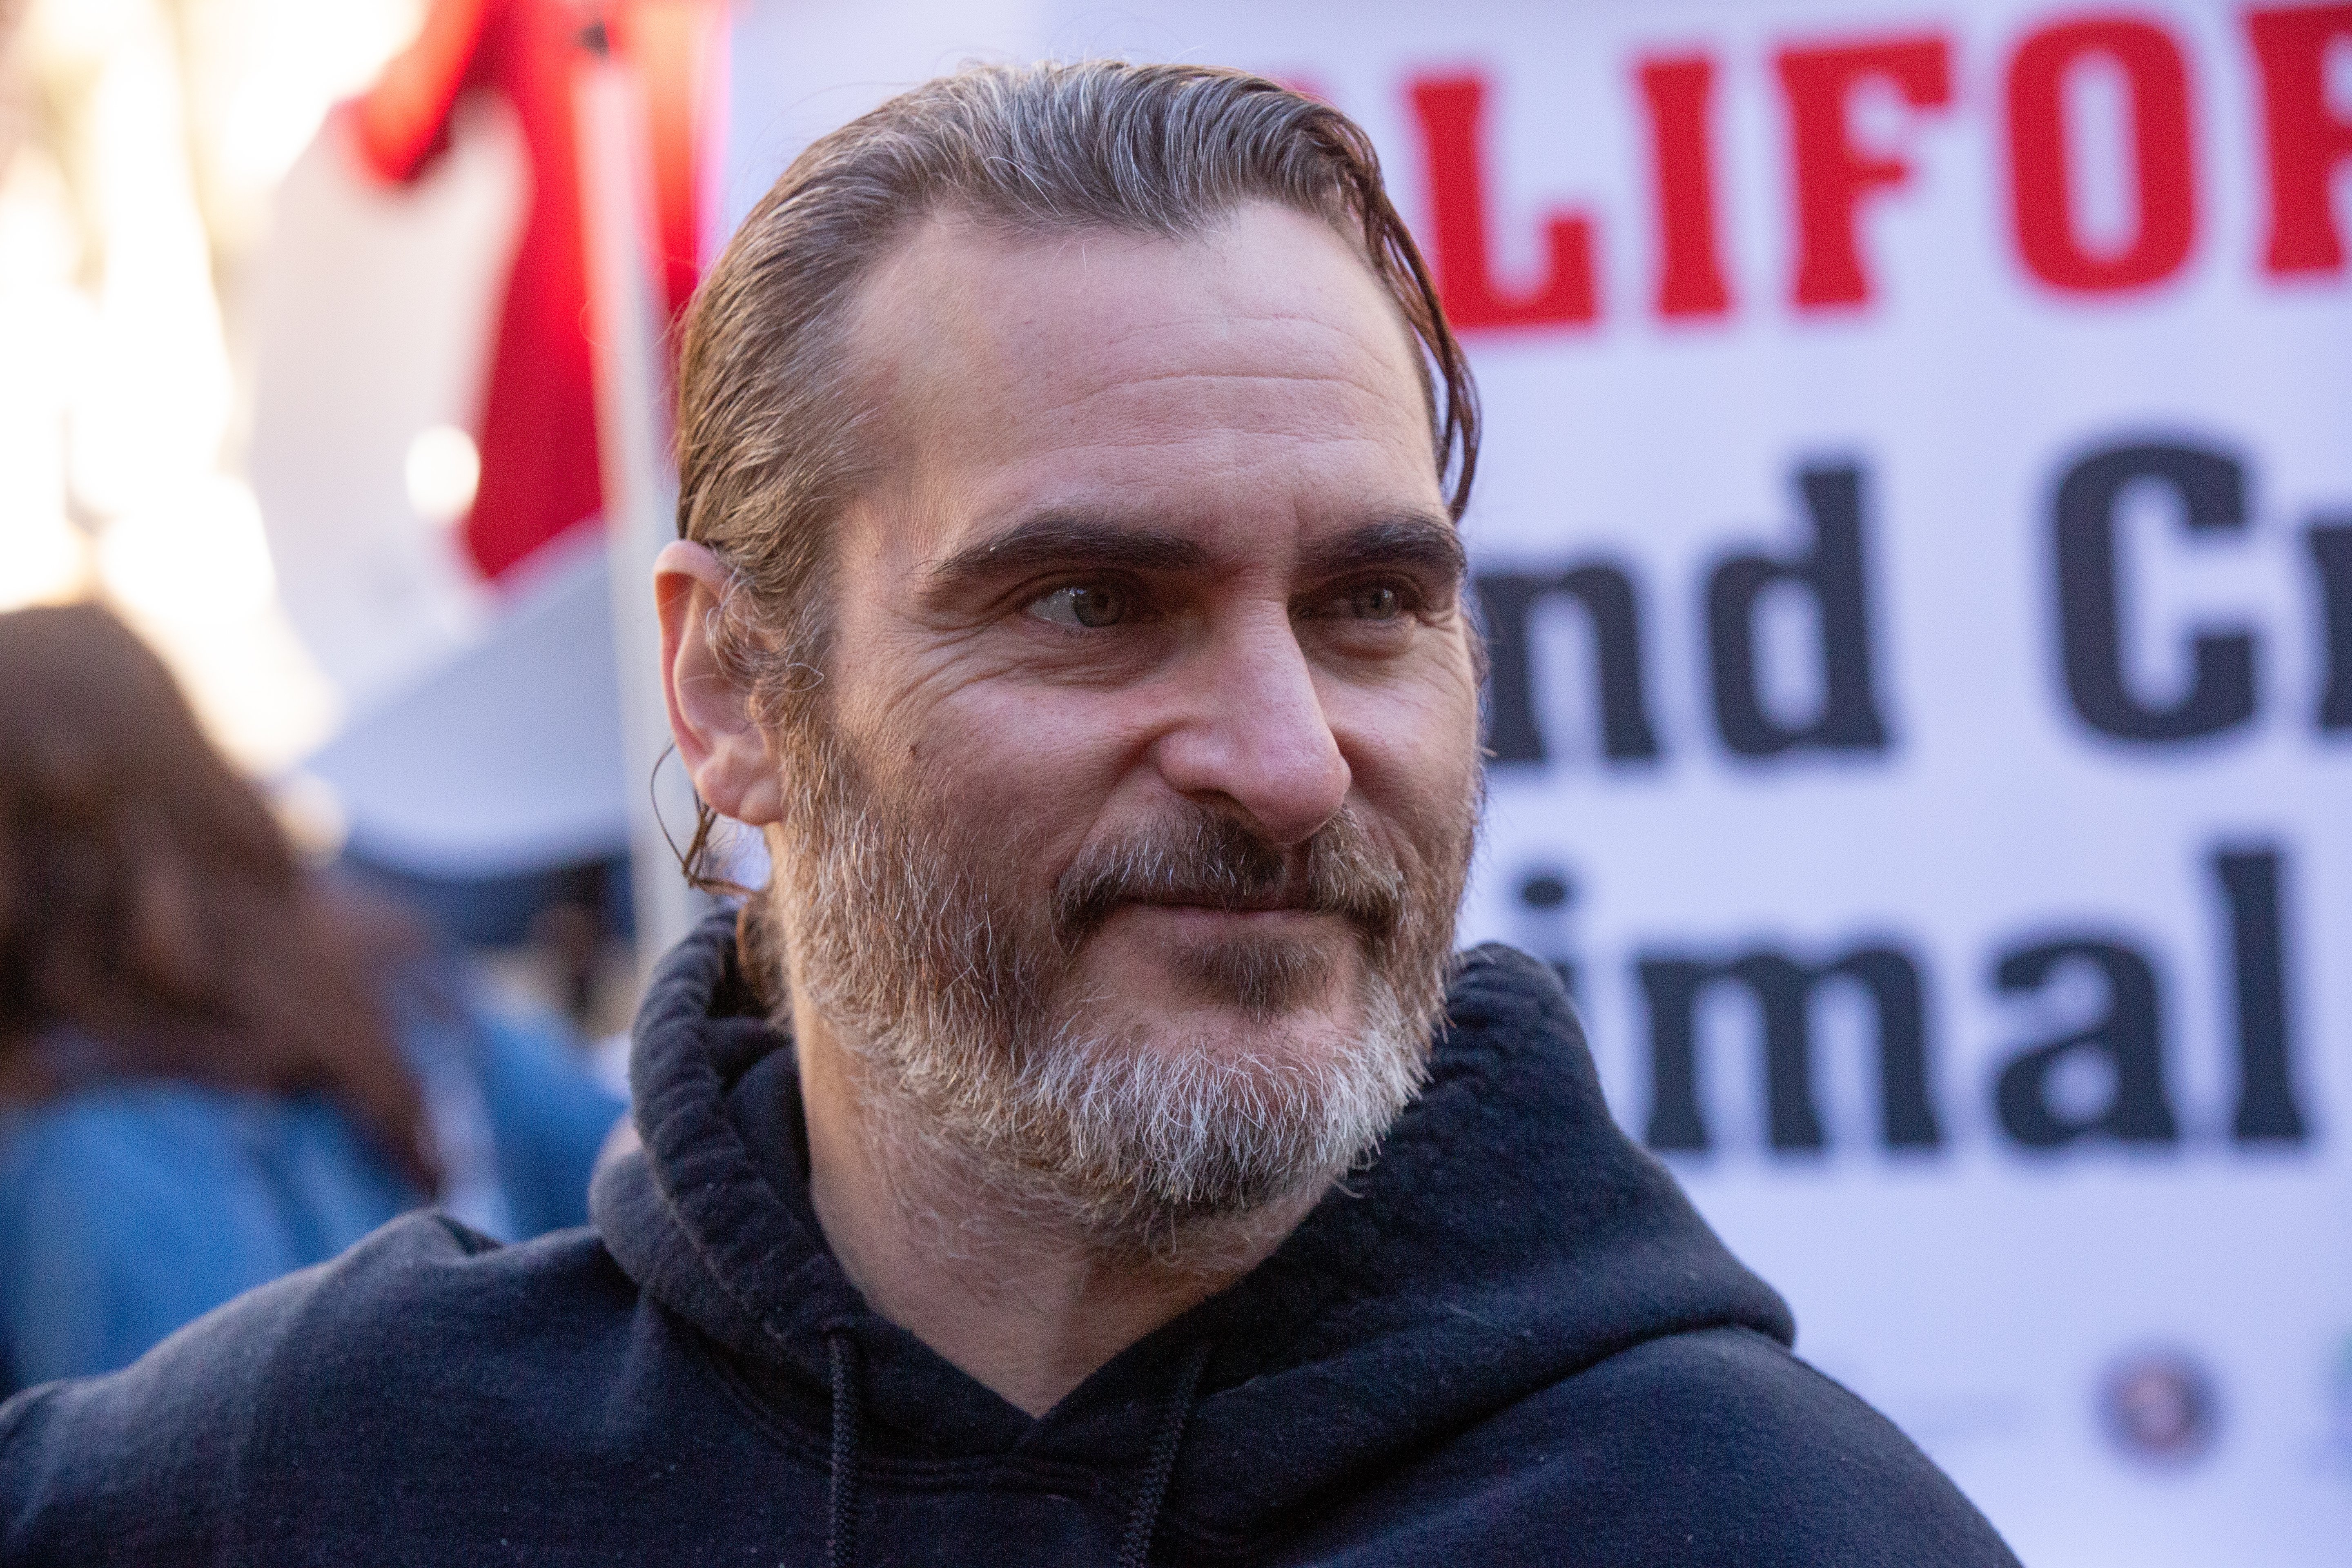 Joaquin Phoenix attends Los Angeles City Councilman Paul Koretz announces introduction of The Circus Cruelty Prevention Act at Los Angeles City Hall on February 19, 2019  | Photo: GettyImages